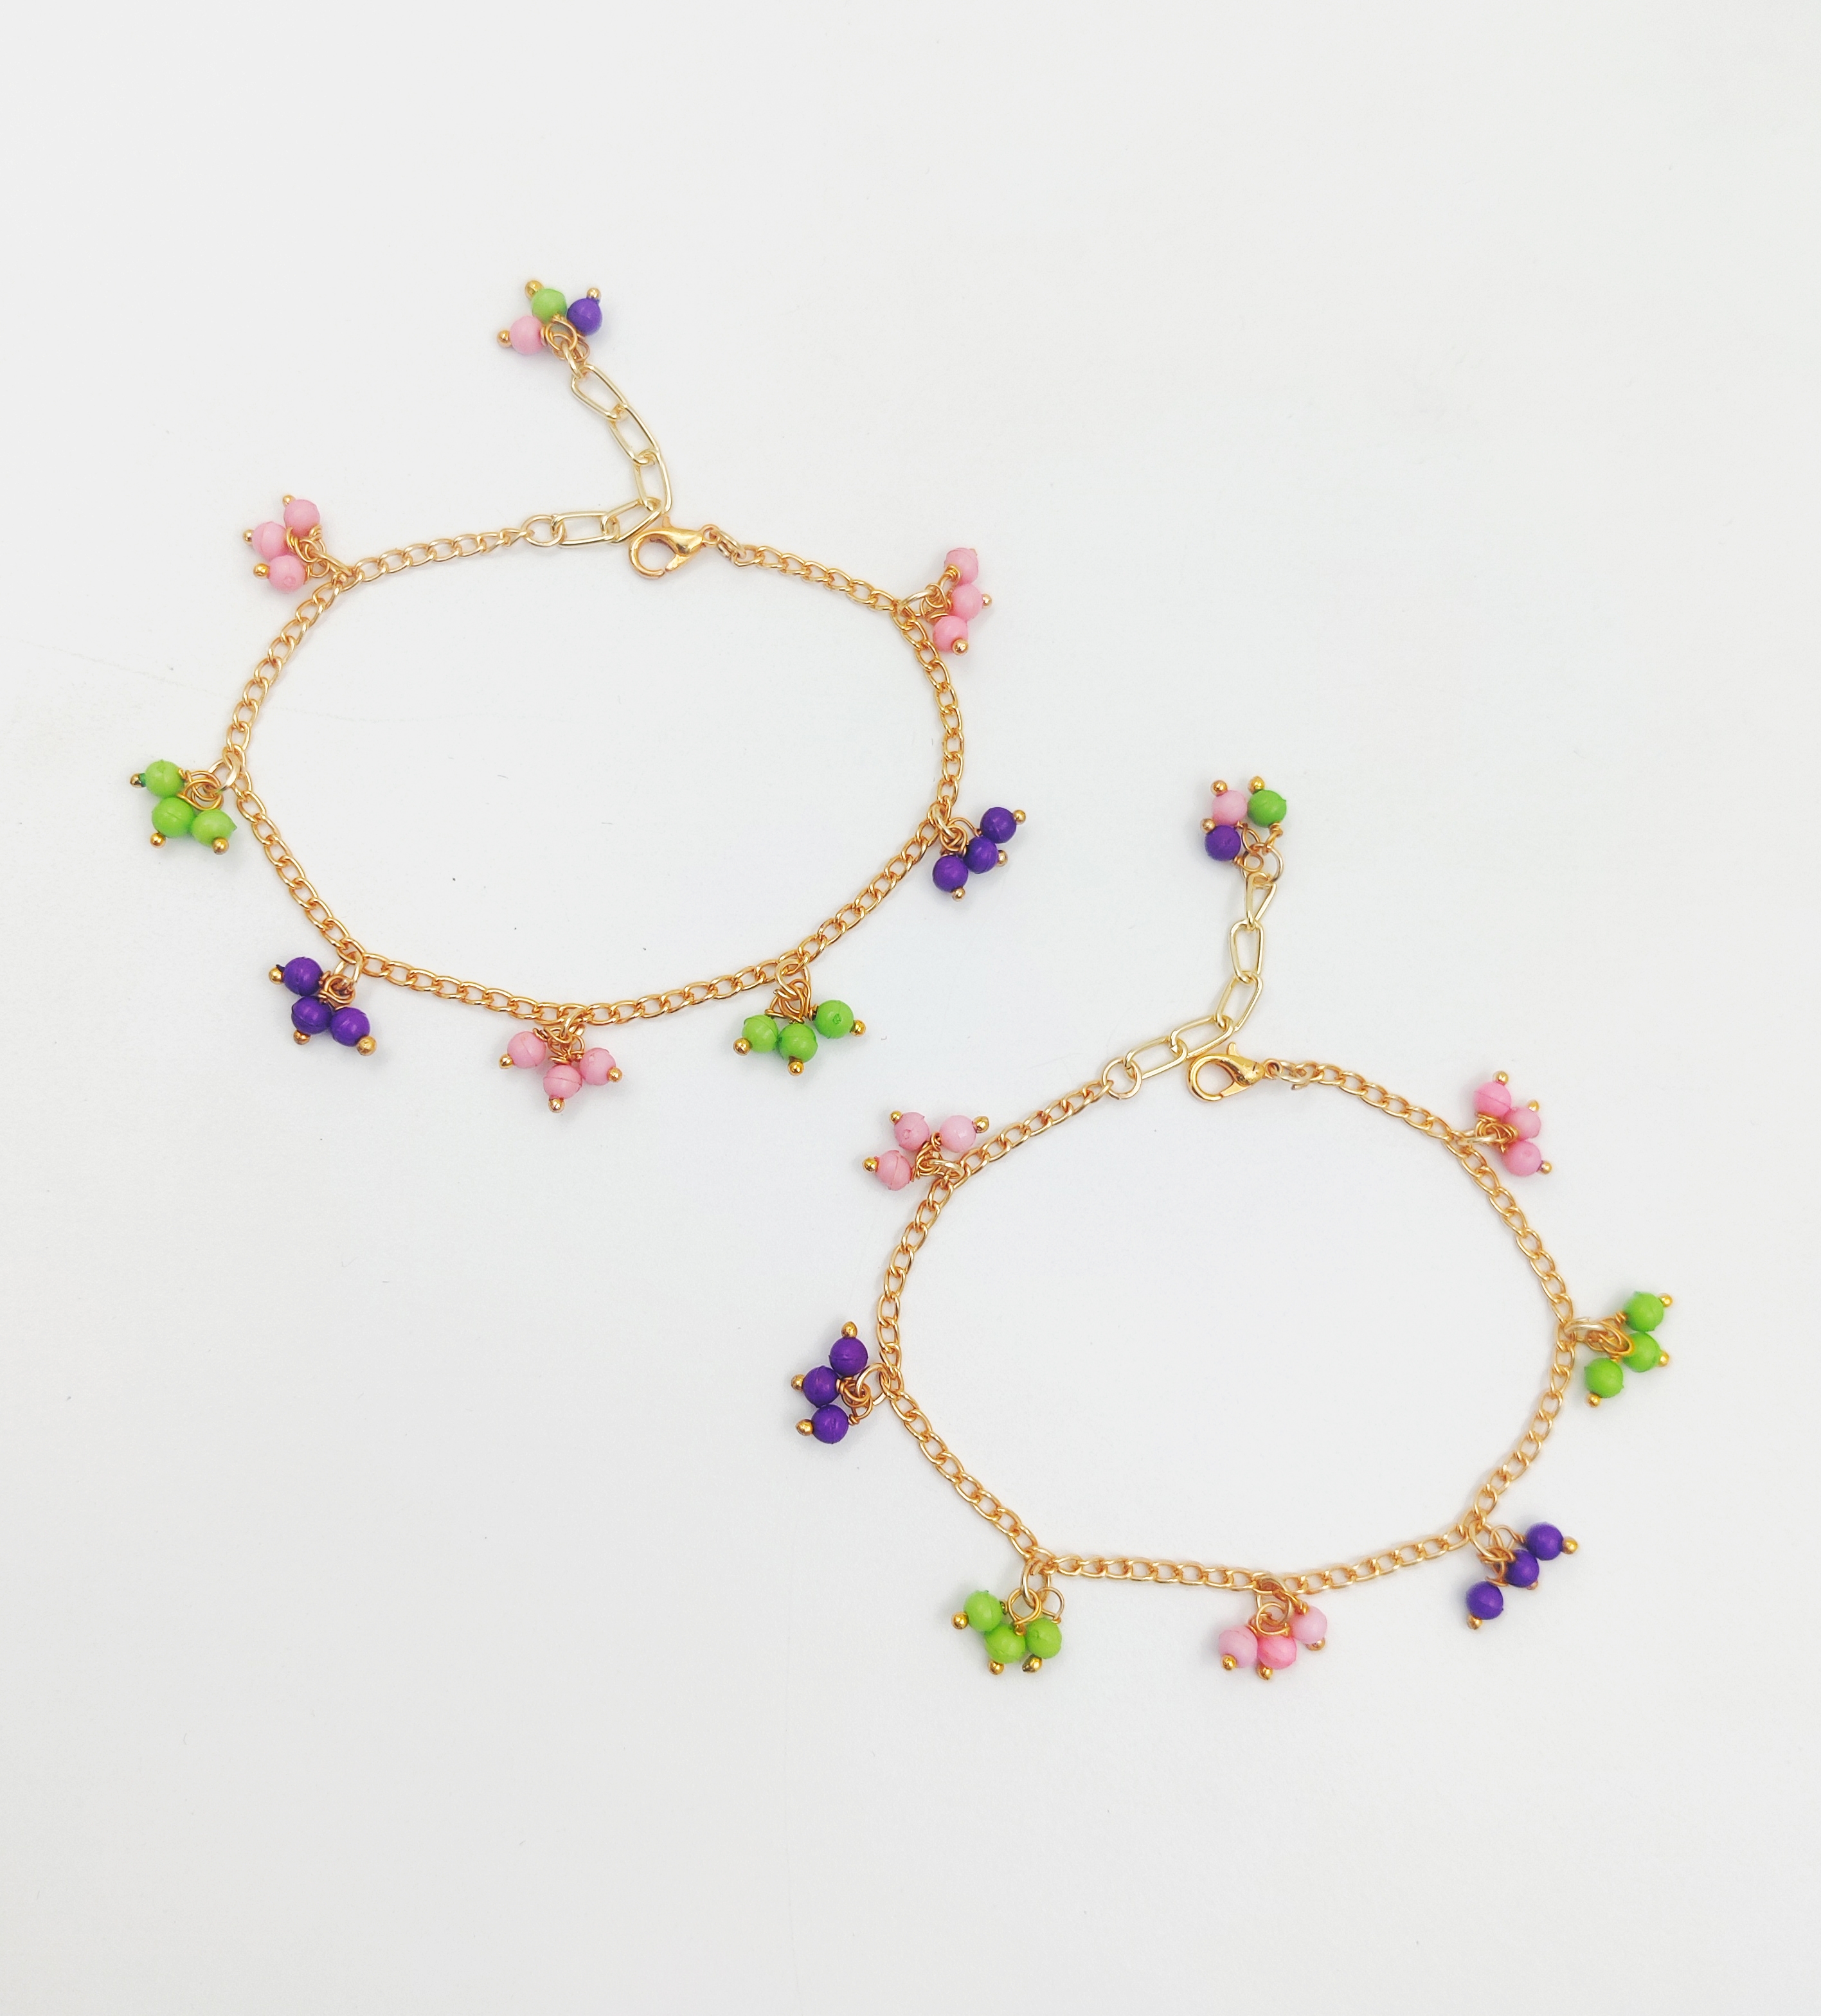 Dangling Beads Anklets - Pink, Green, Purple